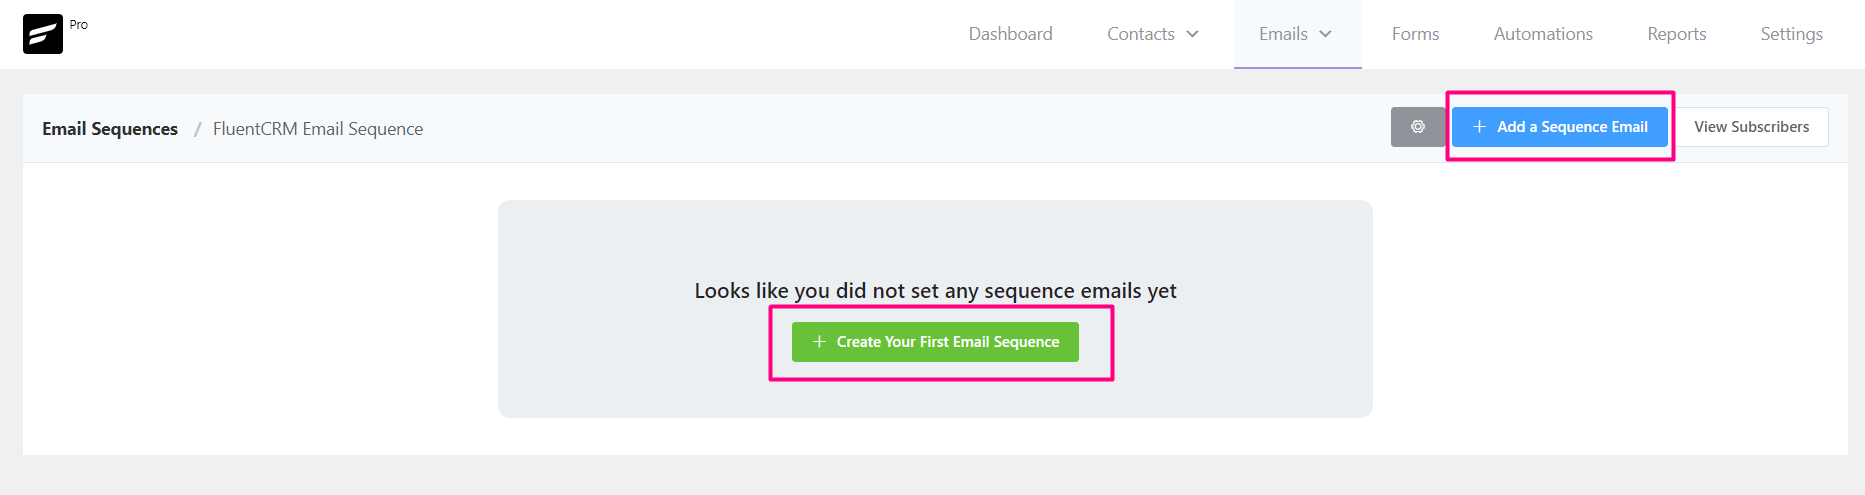 crm sequence add sequence email